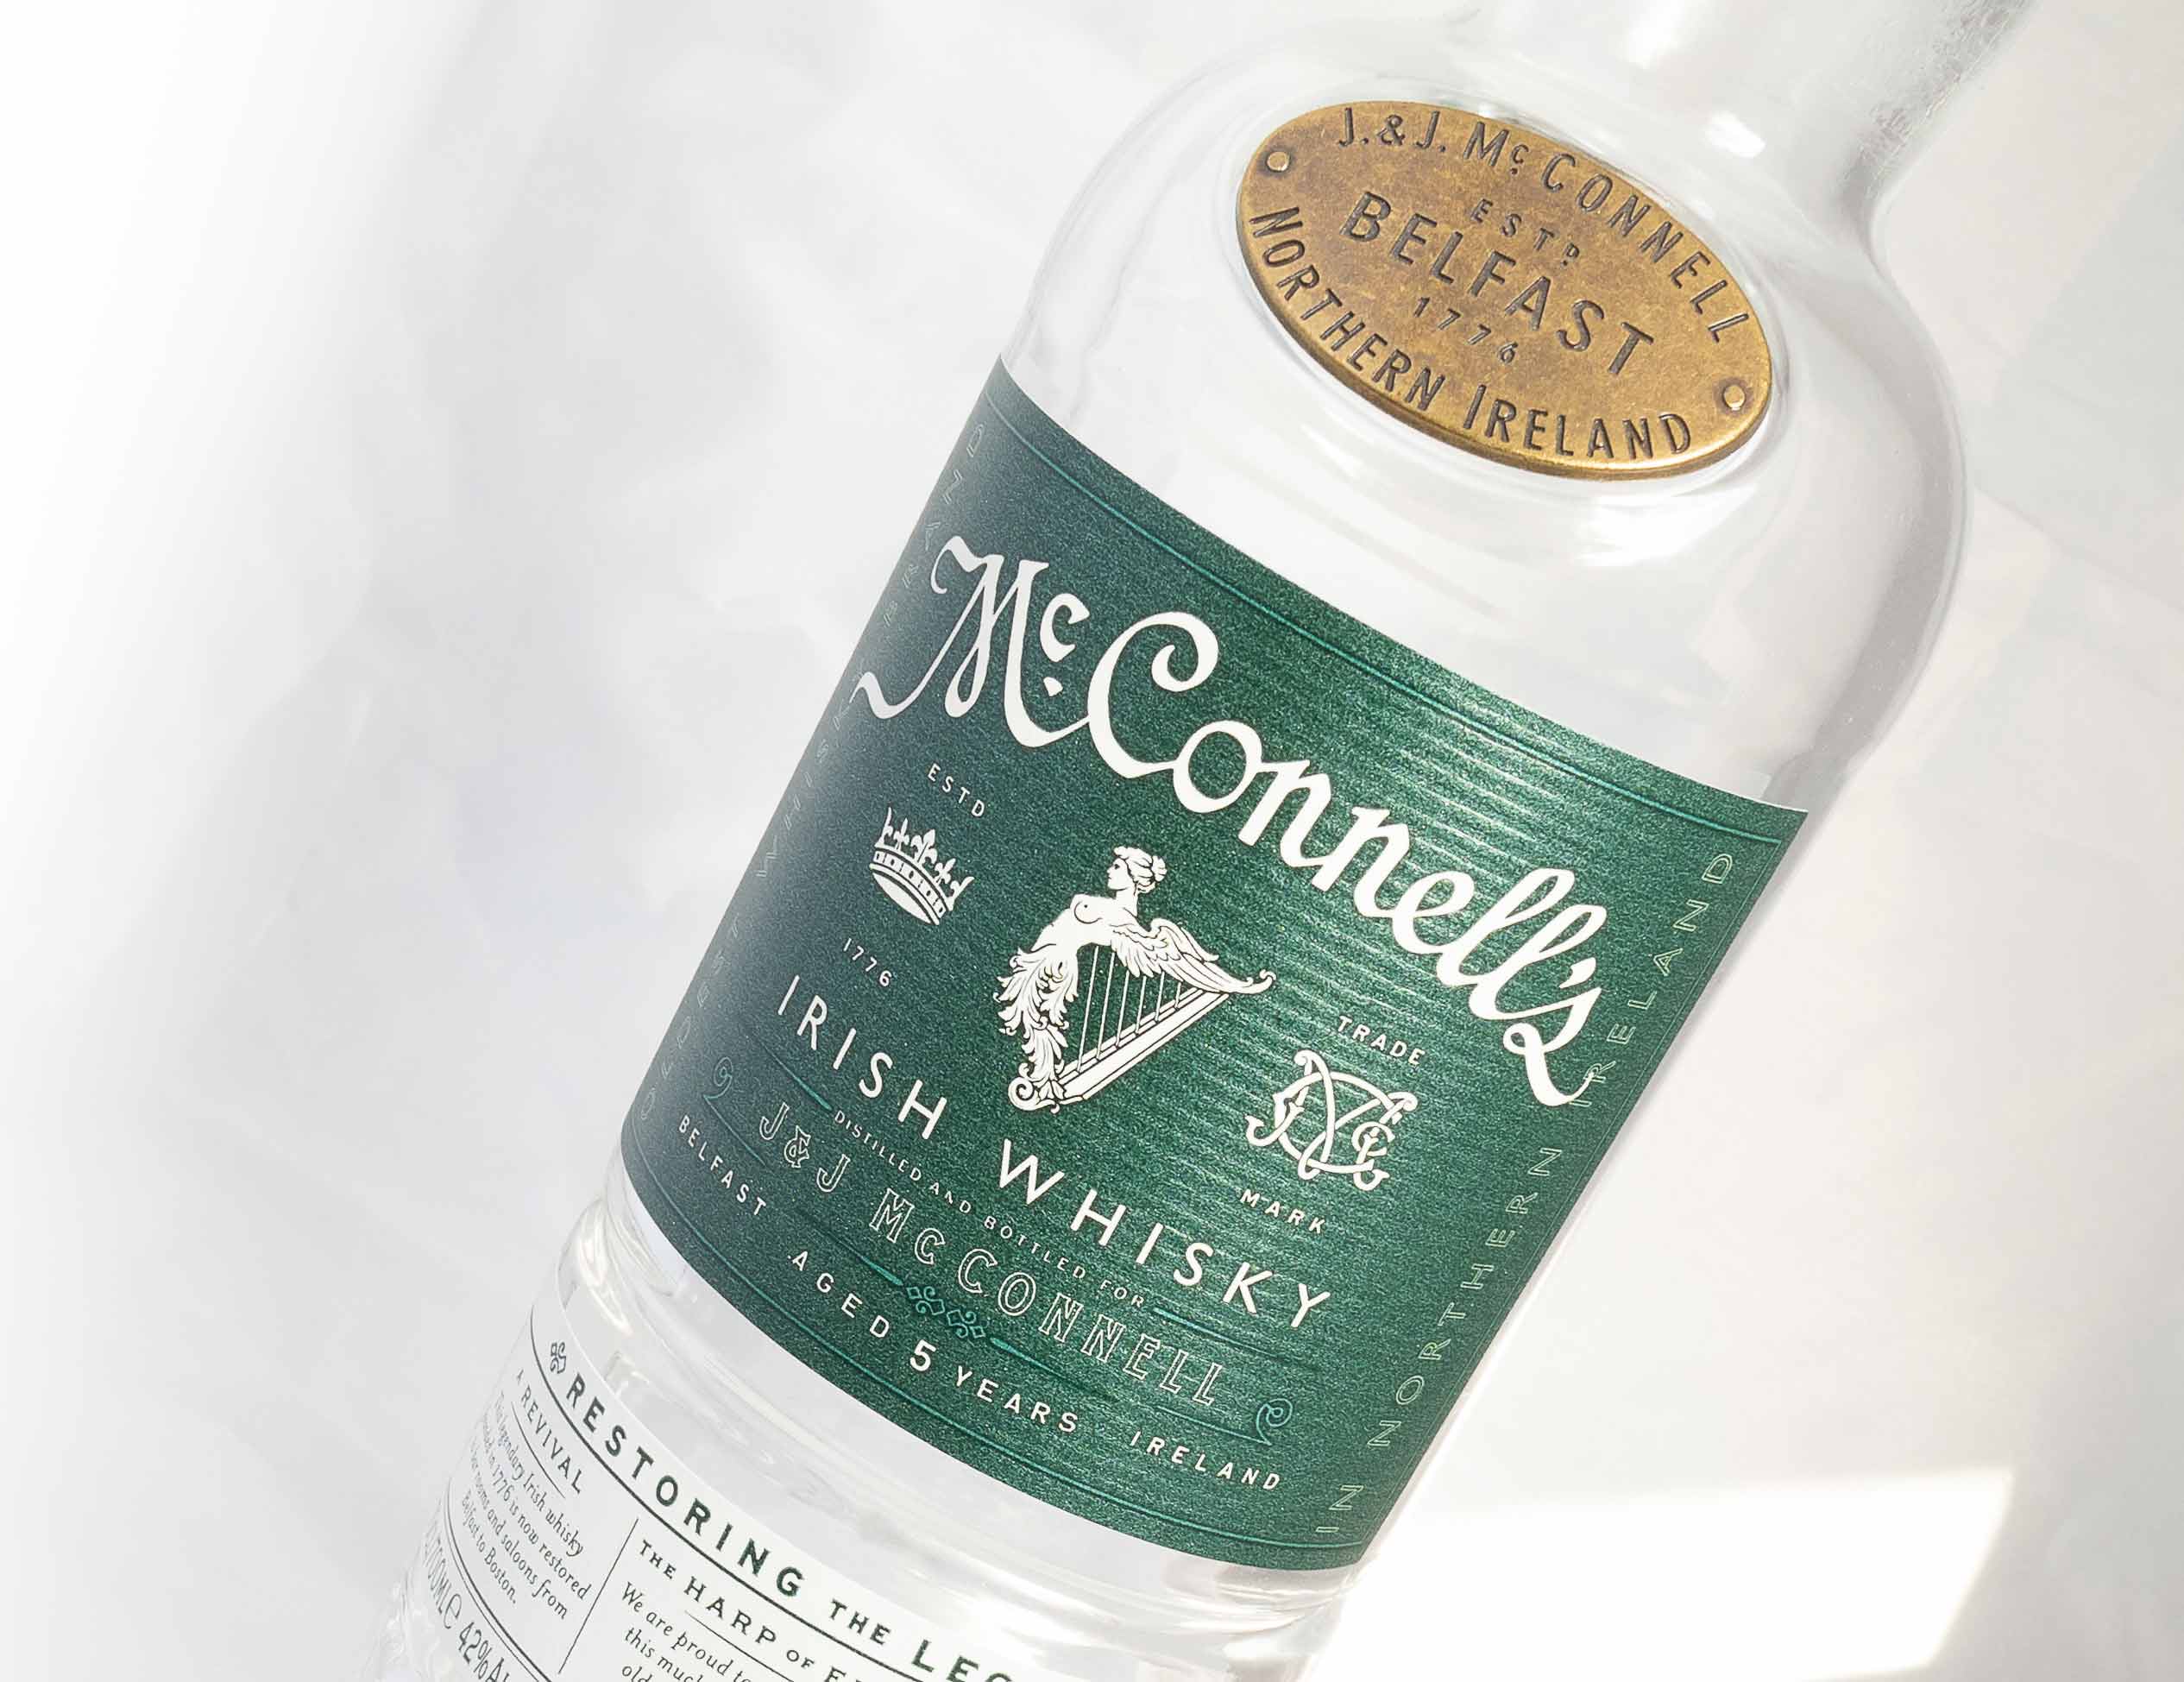 McConnell’s Irish whisky